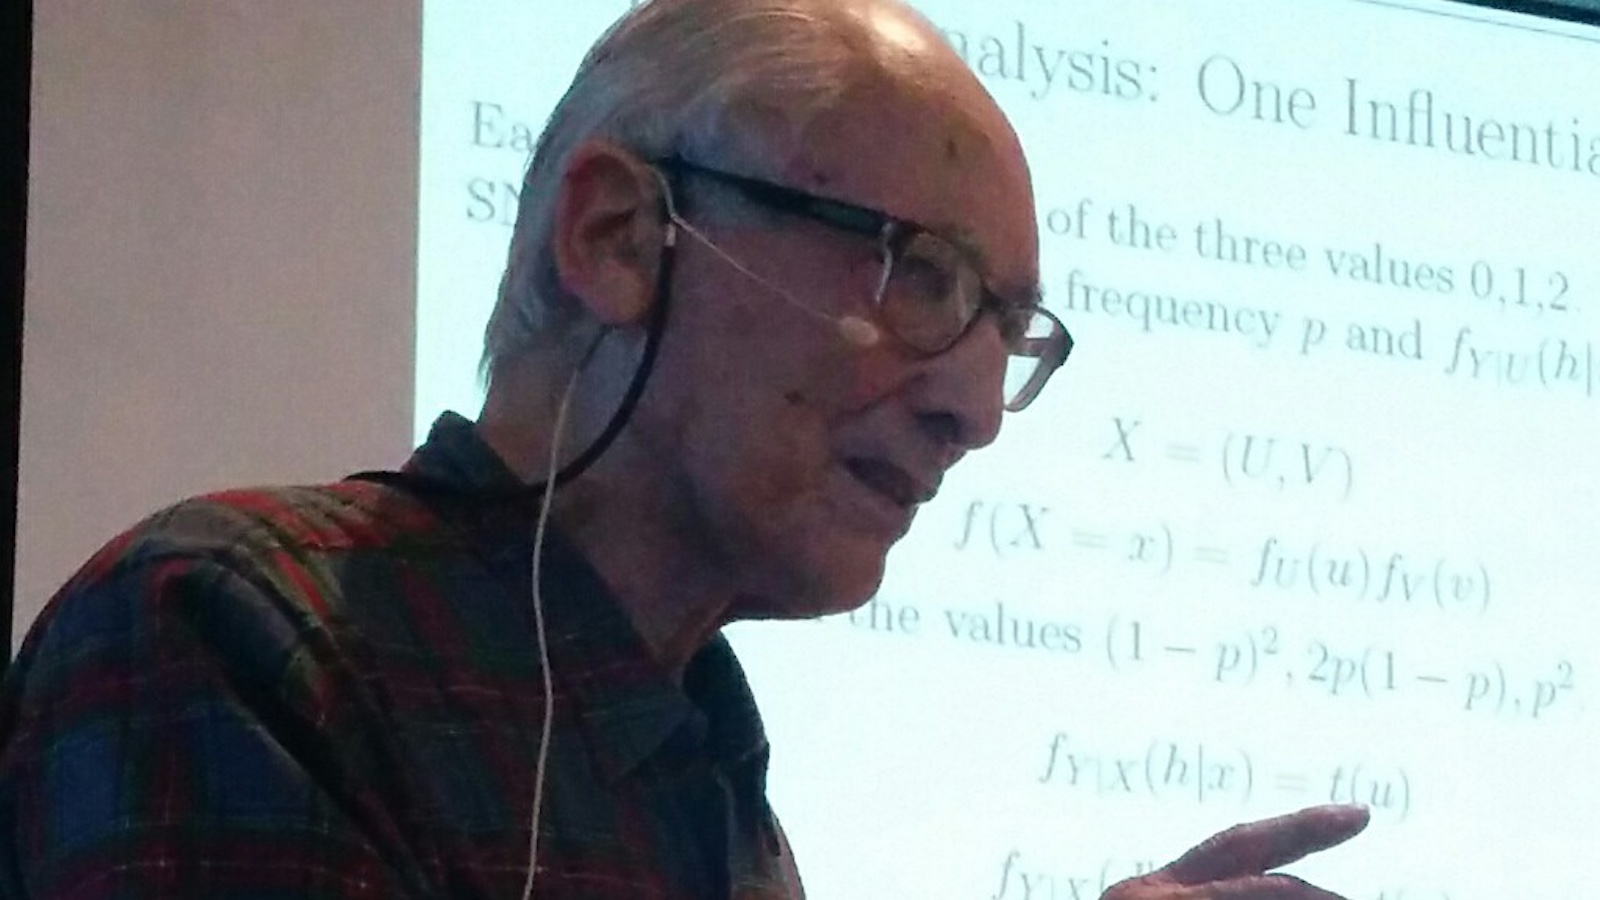 An elderly man speaks while wearing a microphone headset, with a mathematical presentation projected behind him.